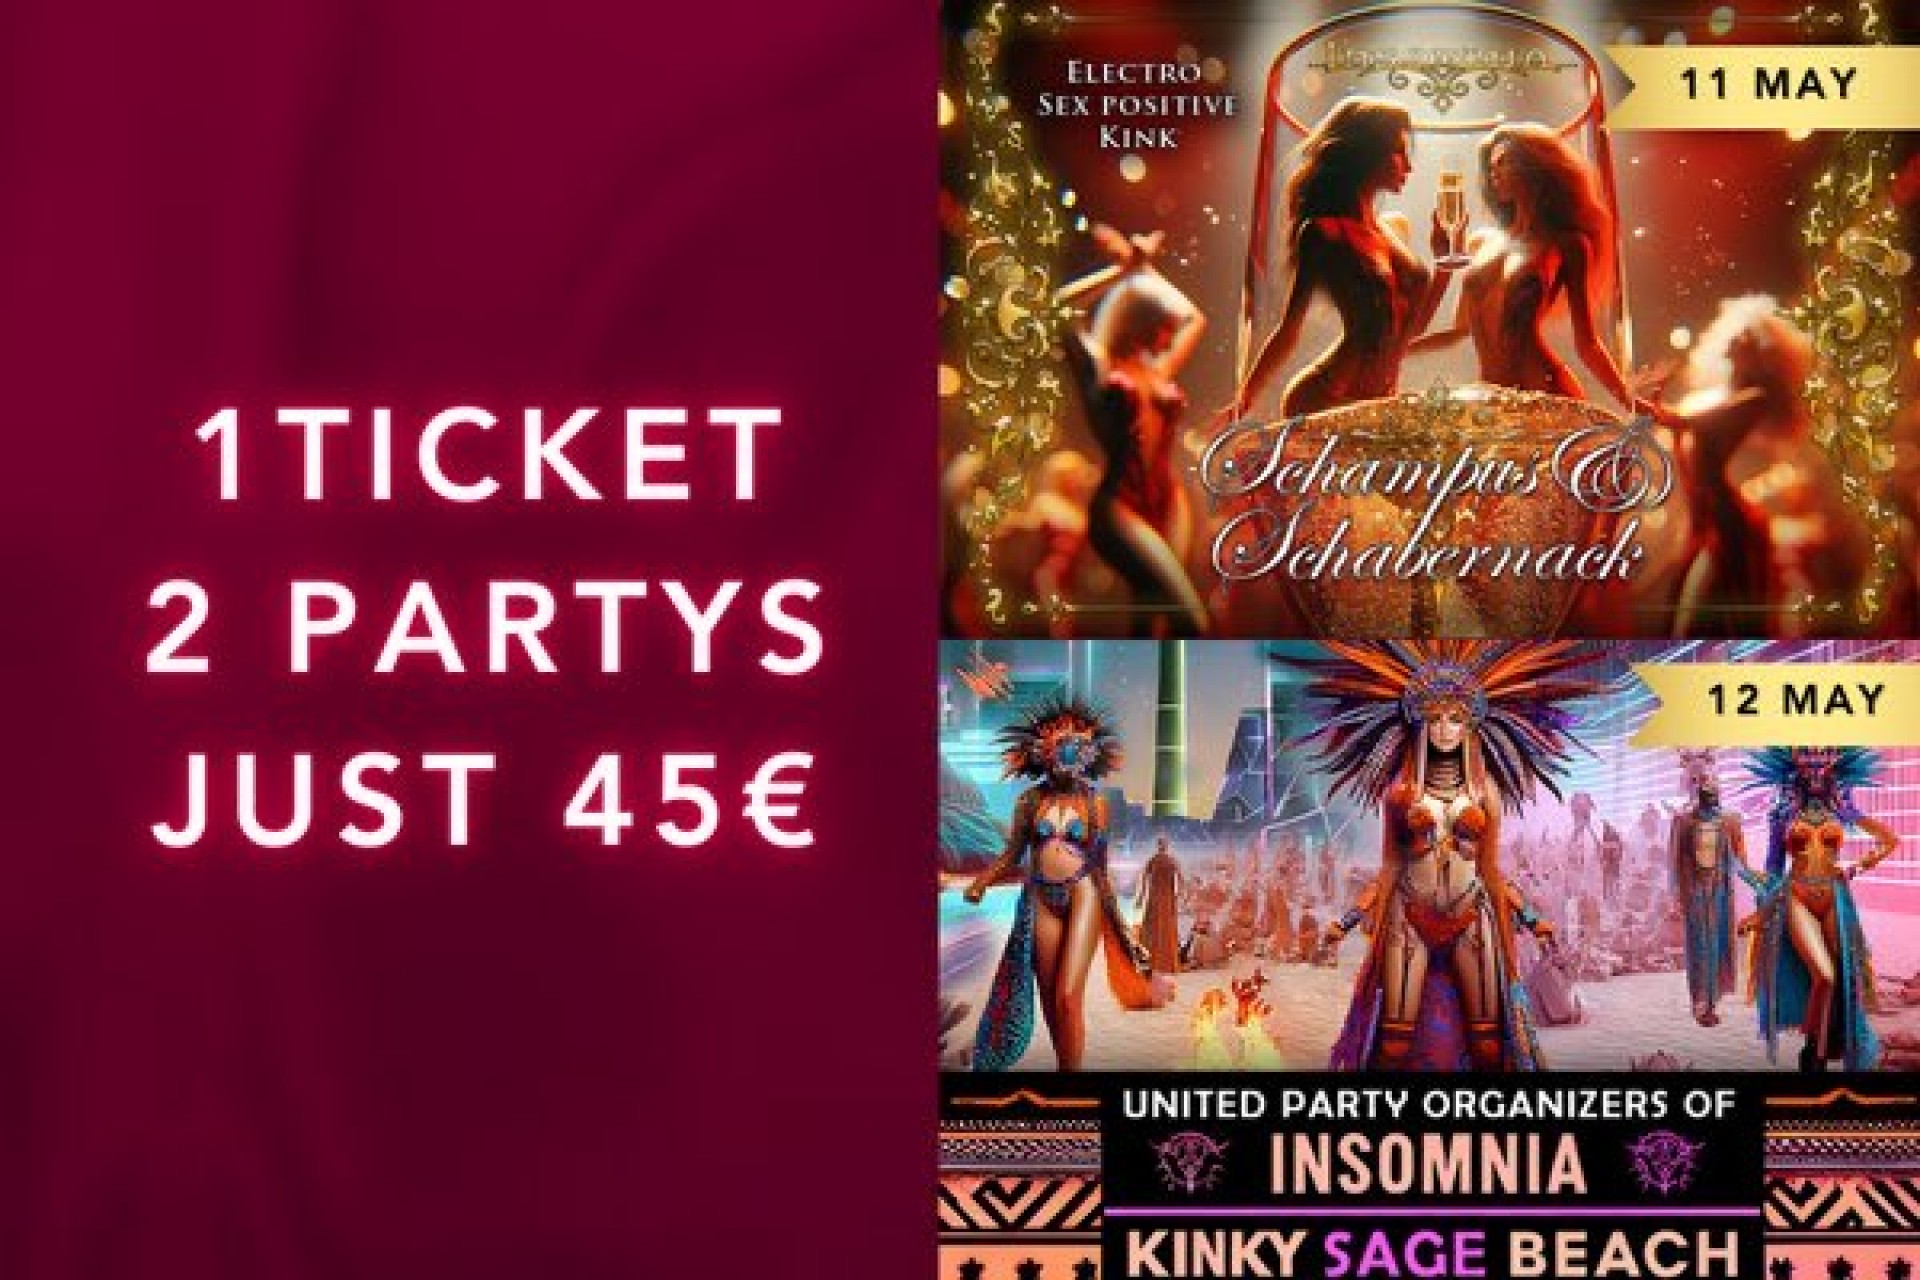 Combo ticket: Champagne & Naughtiness & Kinky beach party